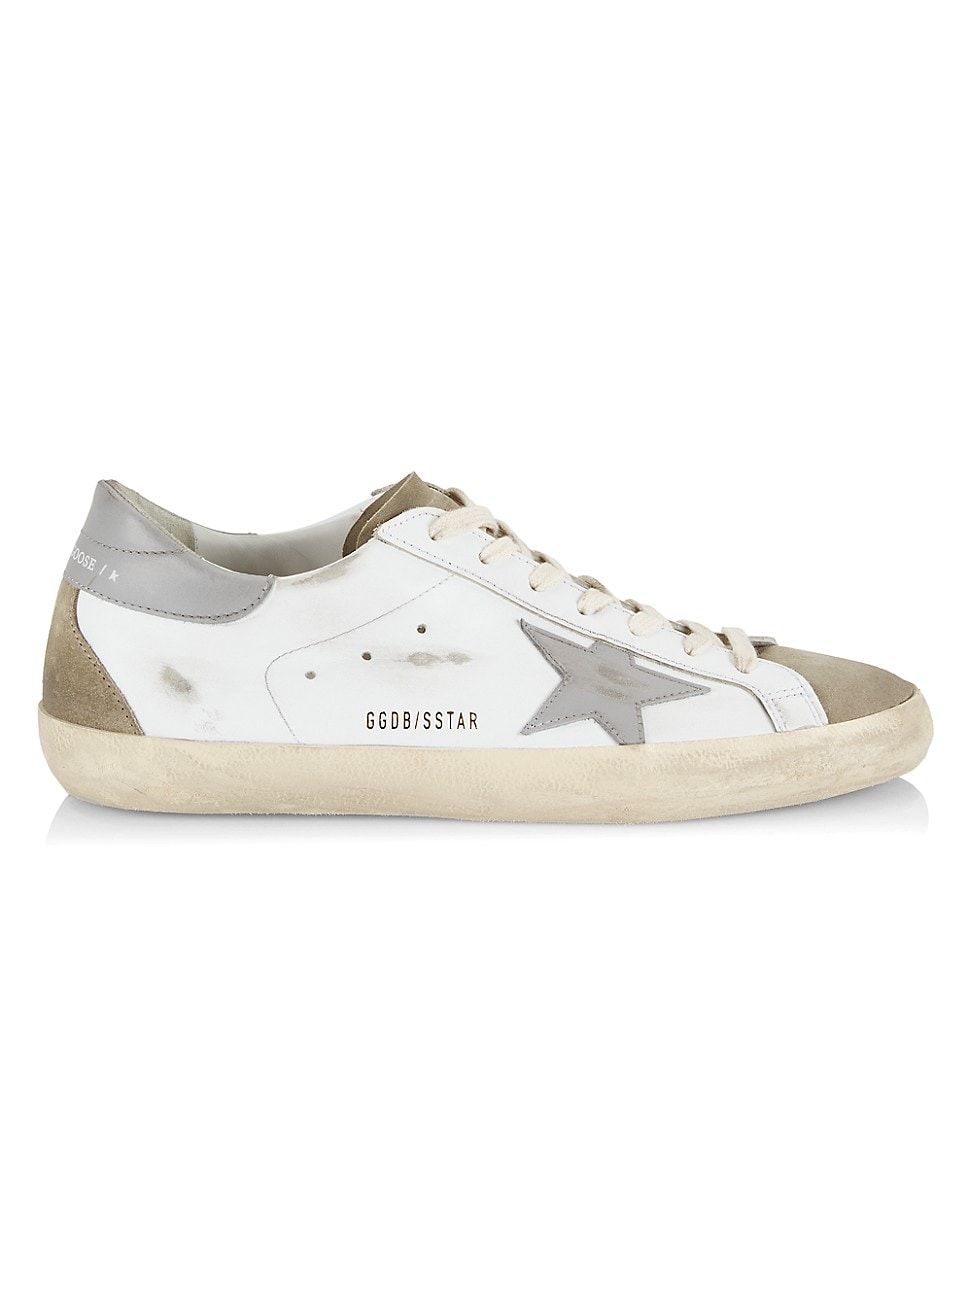 Men's Super-Star Leather Sneakers - White Taupe Grey - Size 6 | Saks Fifth Avenue